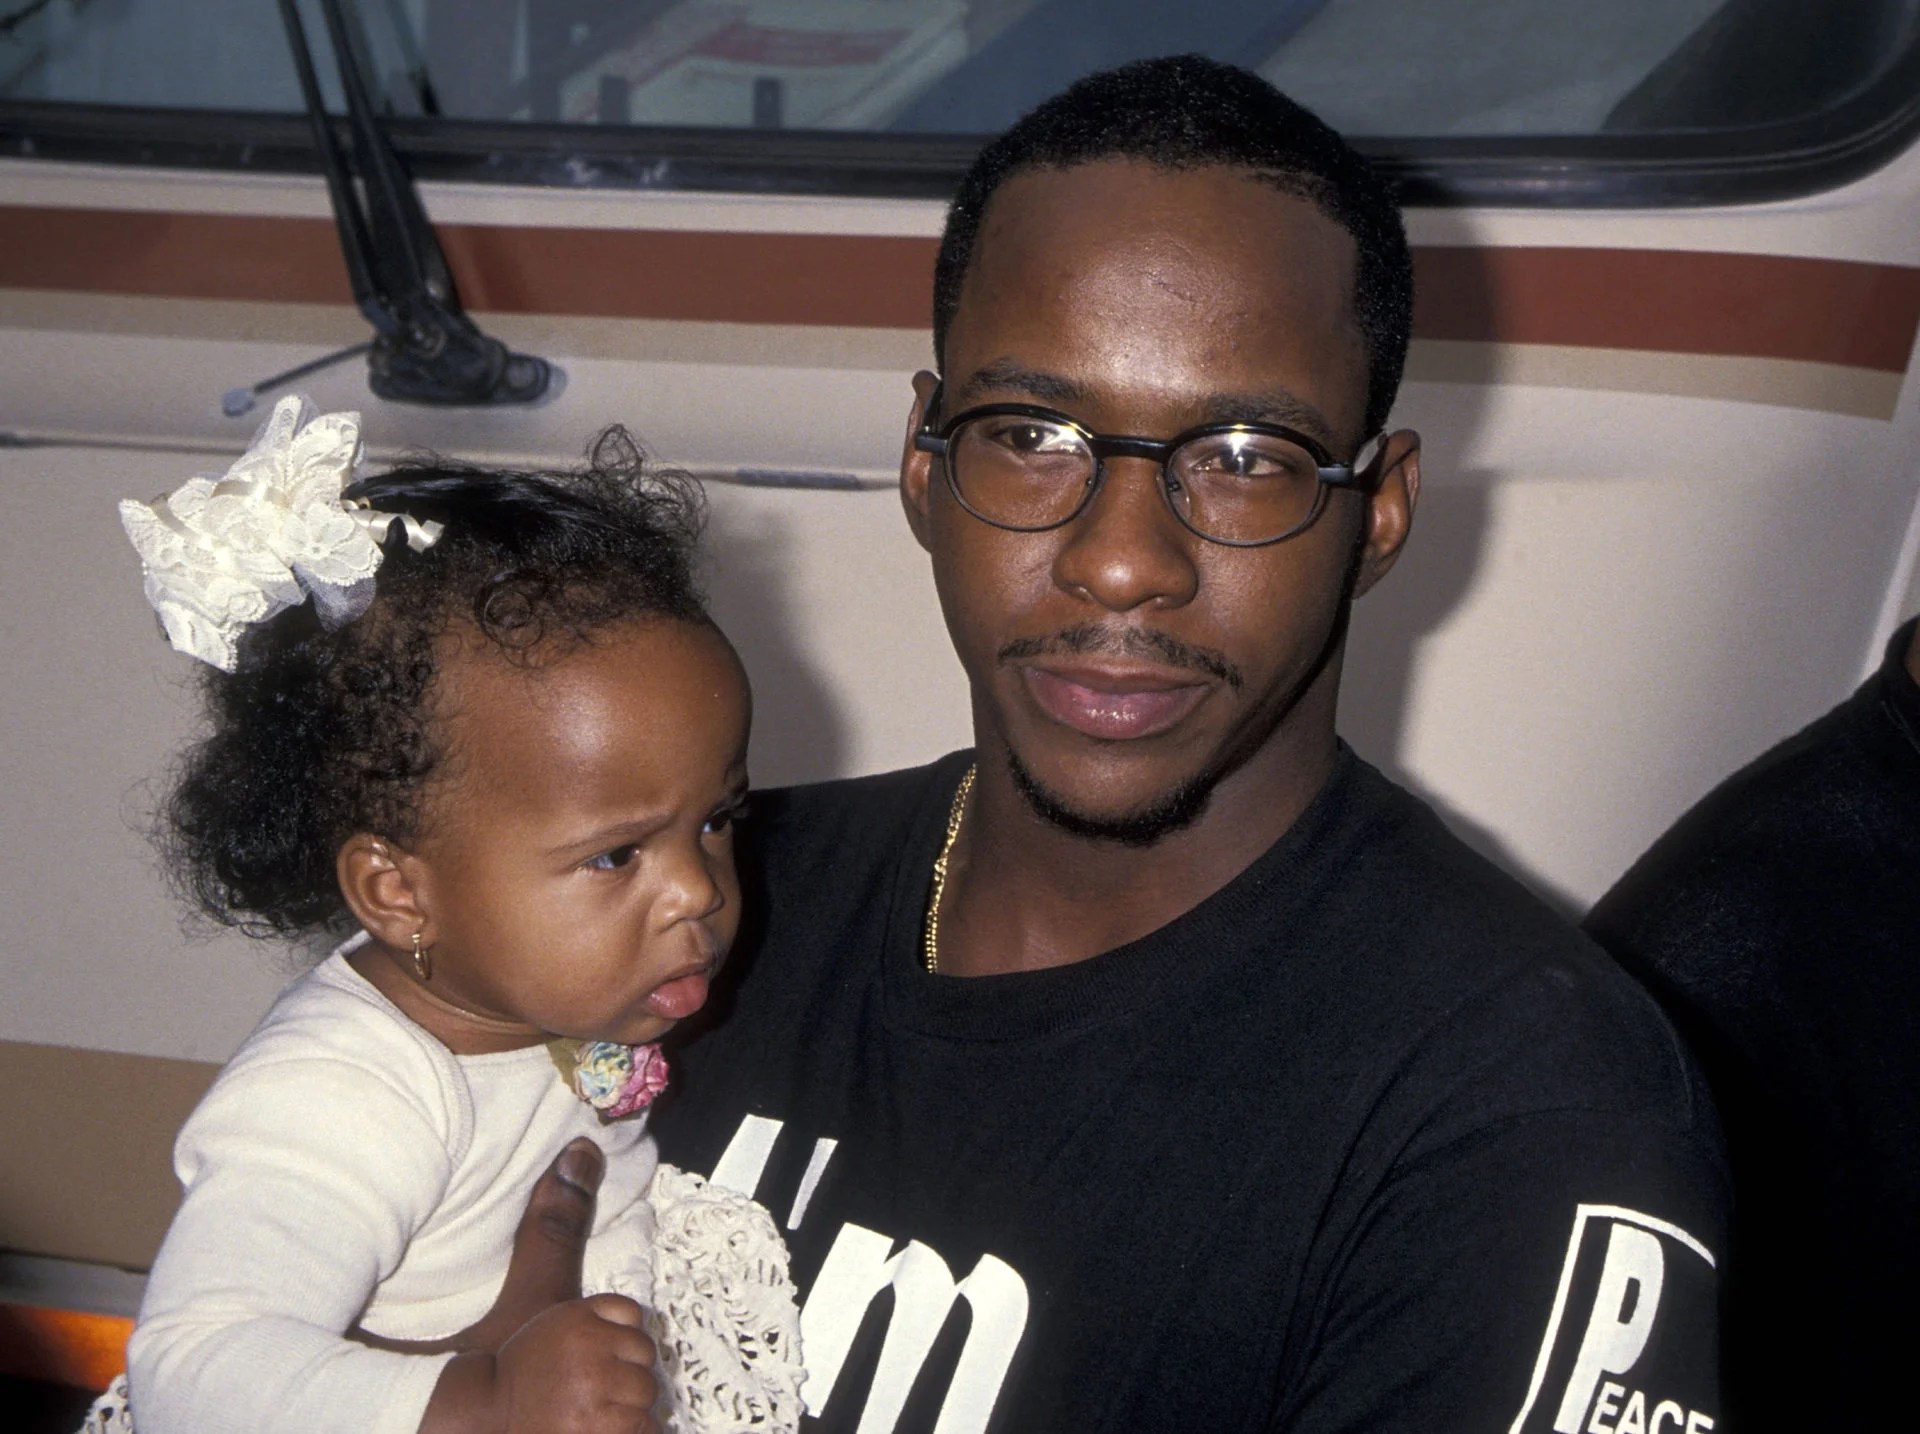 Bobby Brown's children How many kids does he have?